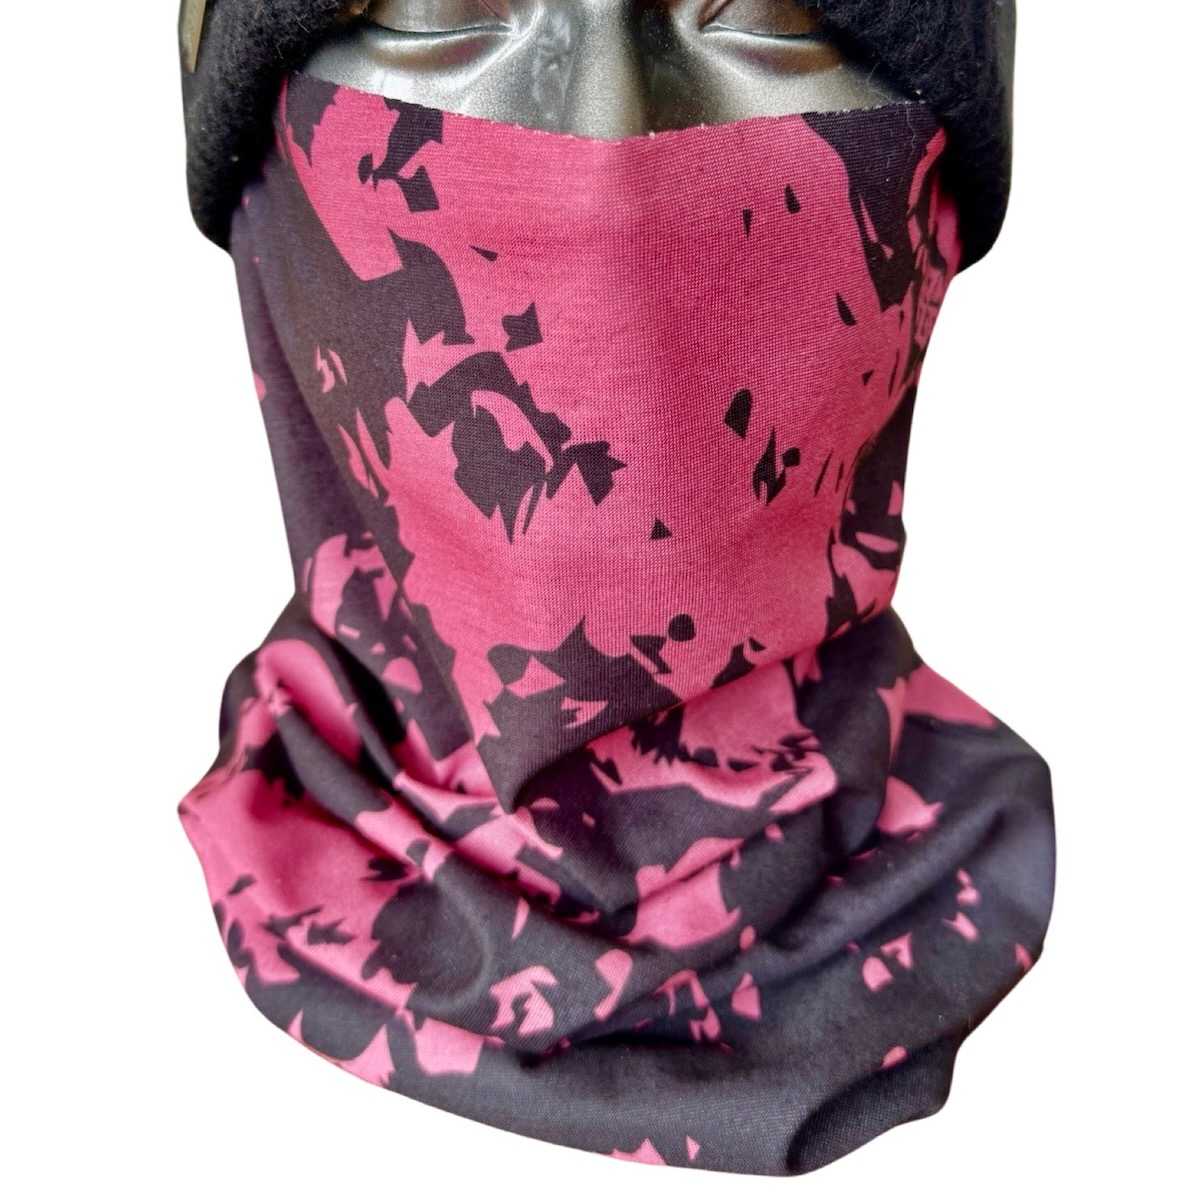 Pink Party AVALON7 neckgaiter facemask for snowboarding